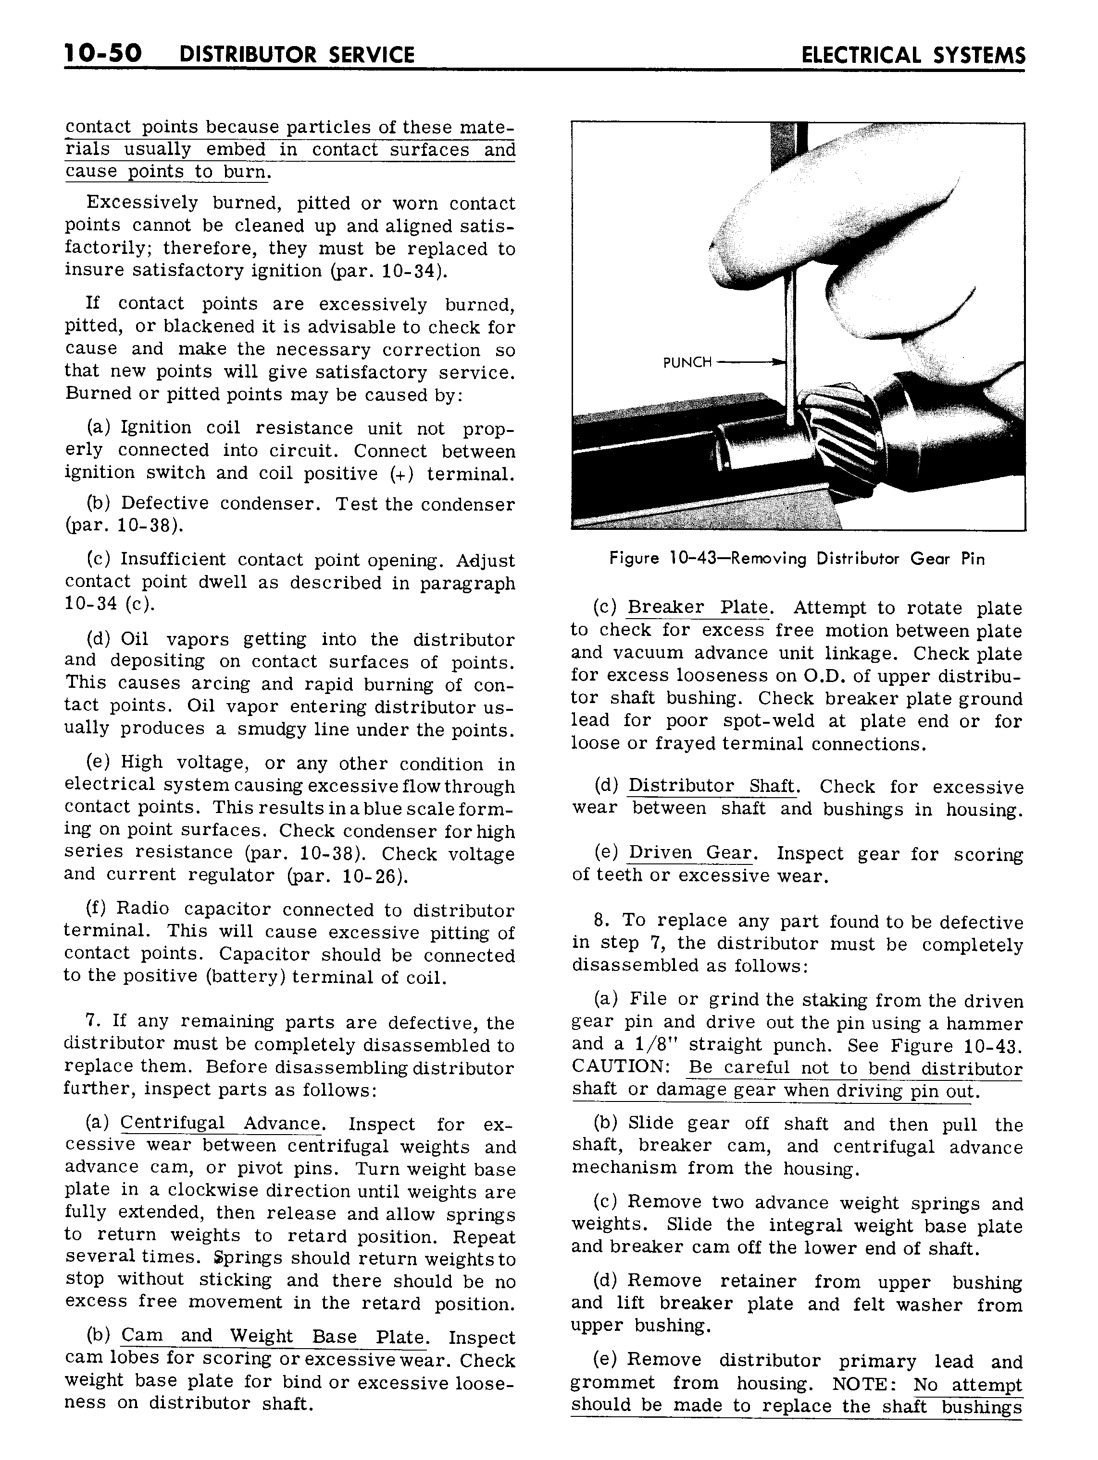 n_10 1961 Buick Shop Manual - Electrical Systems-050-050.jpg